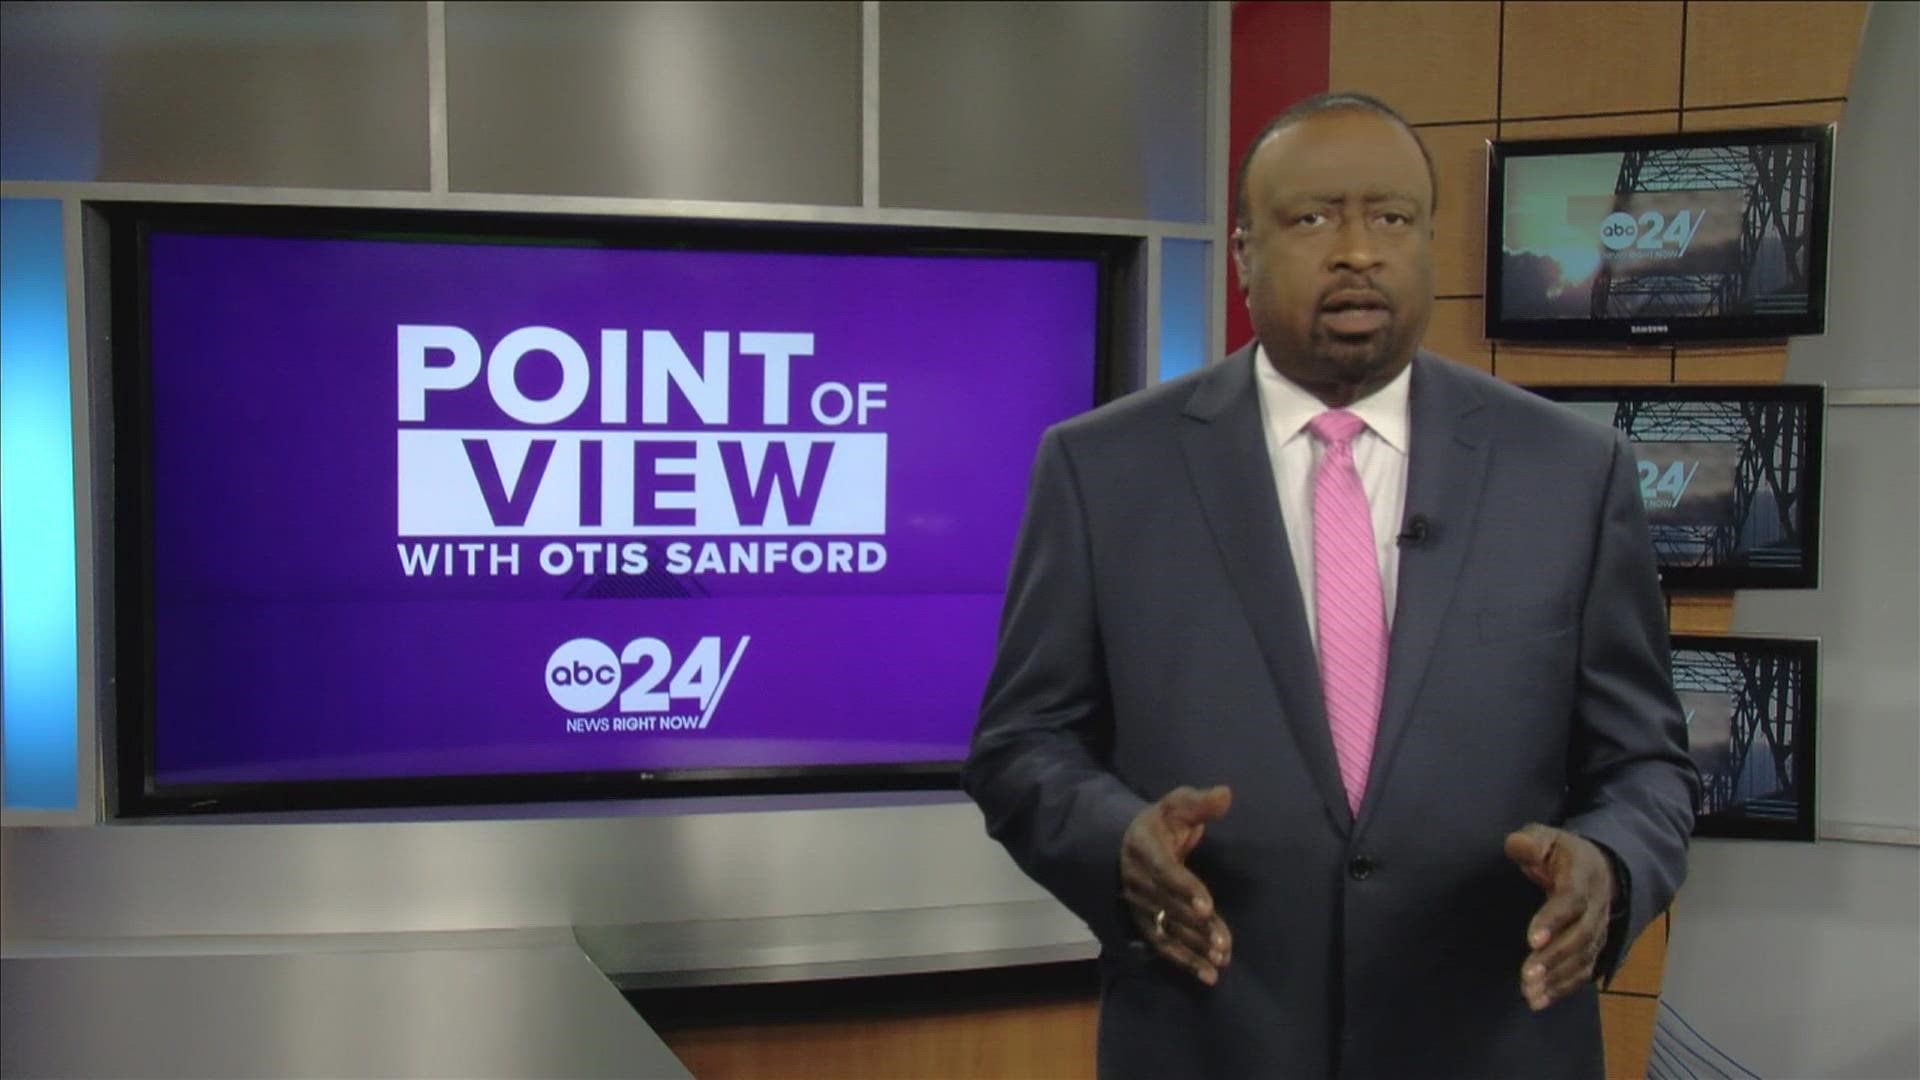 ABC24 political analyst and commentator Otis Sanford shared his point of view on Tennessee private school voucher program.